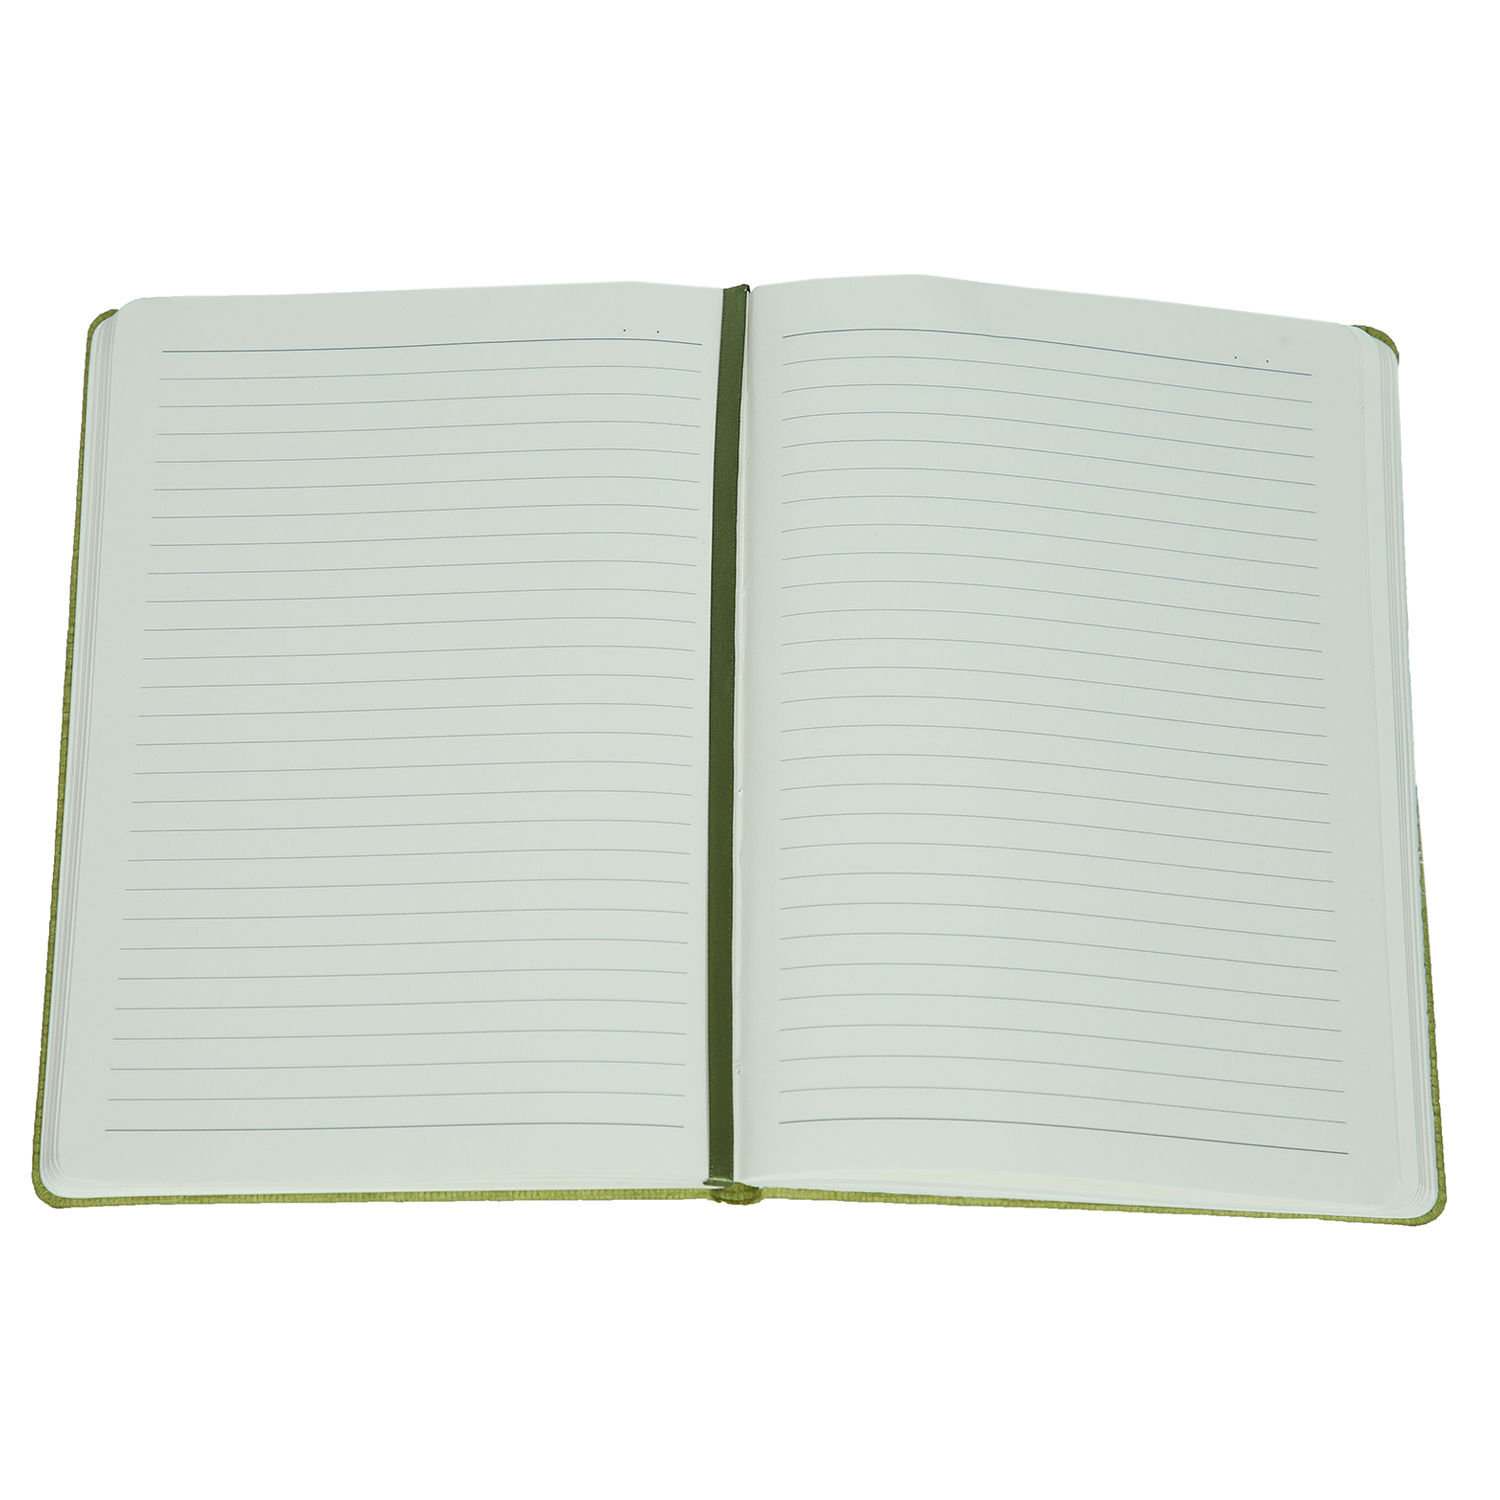 Comma Flash - A5 Size - Hard Bound Notebook with 16GB USB Pen Drive - (Green)